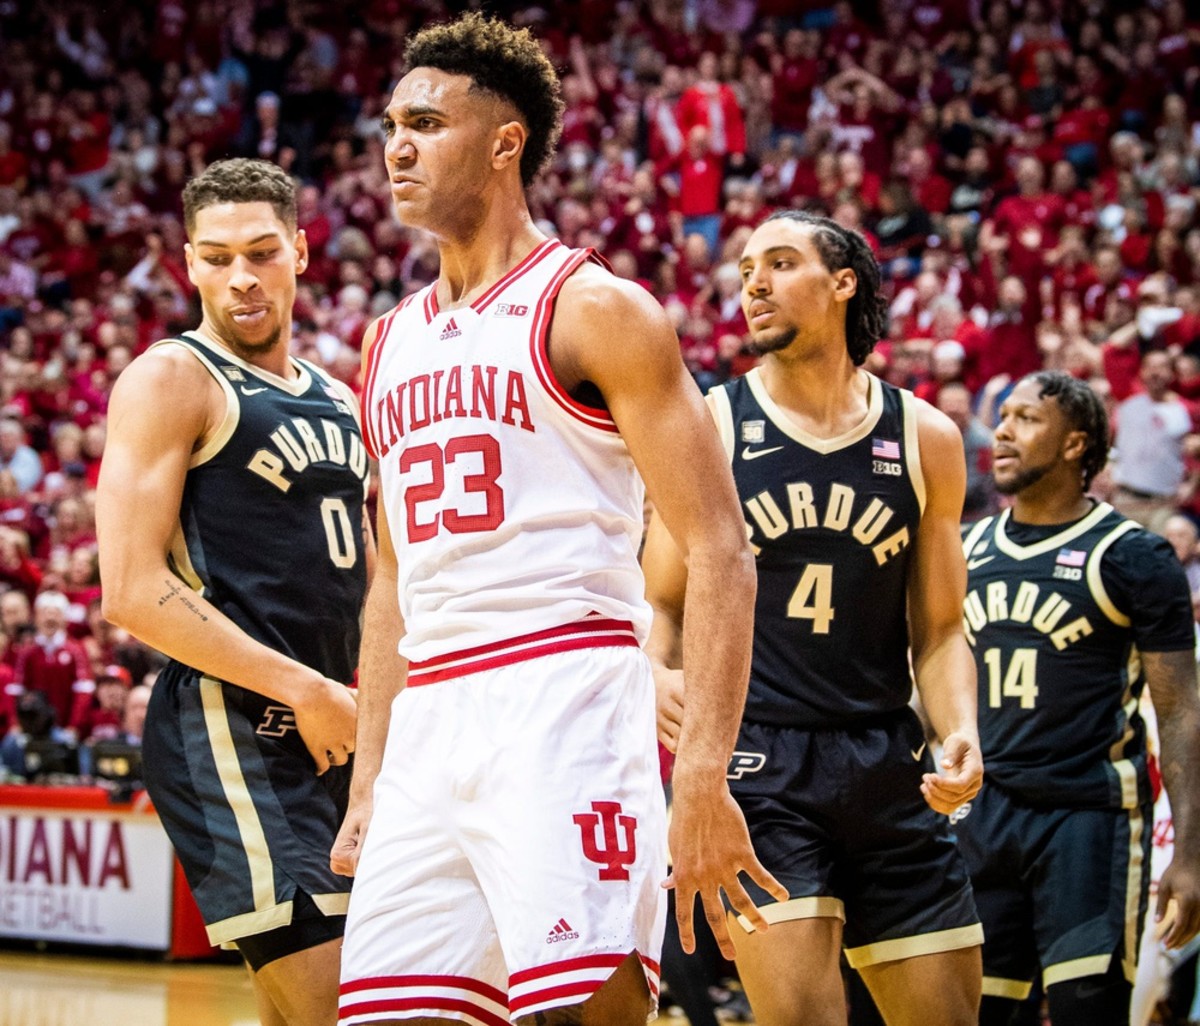 Indiana's Trayce Jackson-Davis (23) stares at the Purdue bench after a dunk during the first half of Indiana versus Purdue men's basketball game at Simon Skjodt Assembly Hall on Saturday, Feb. 4, 2023.